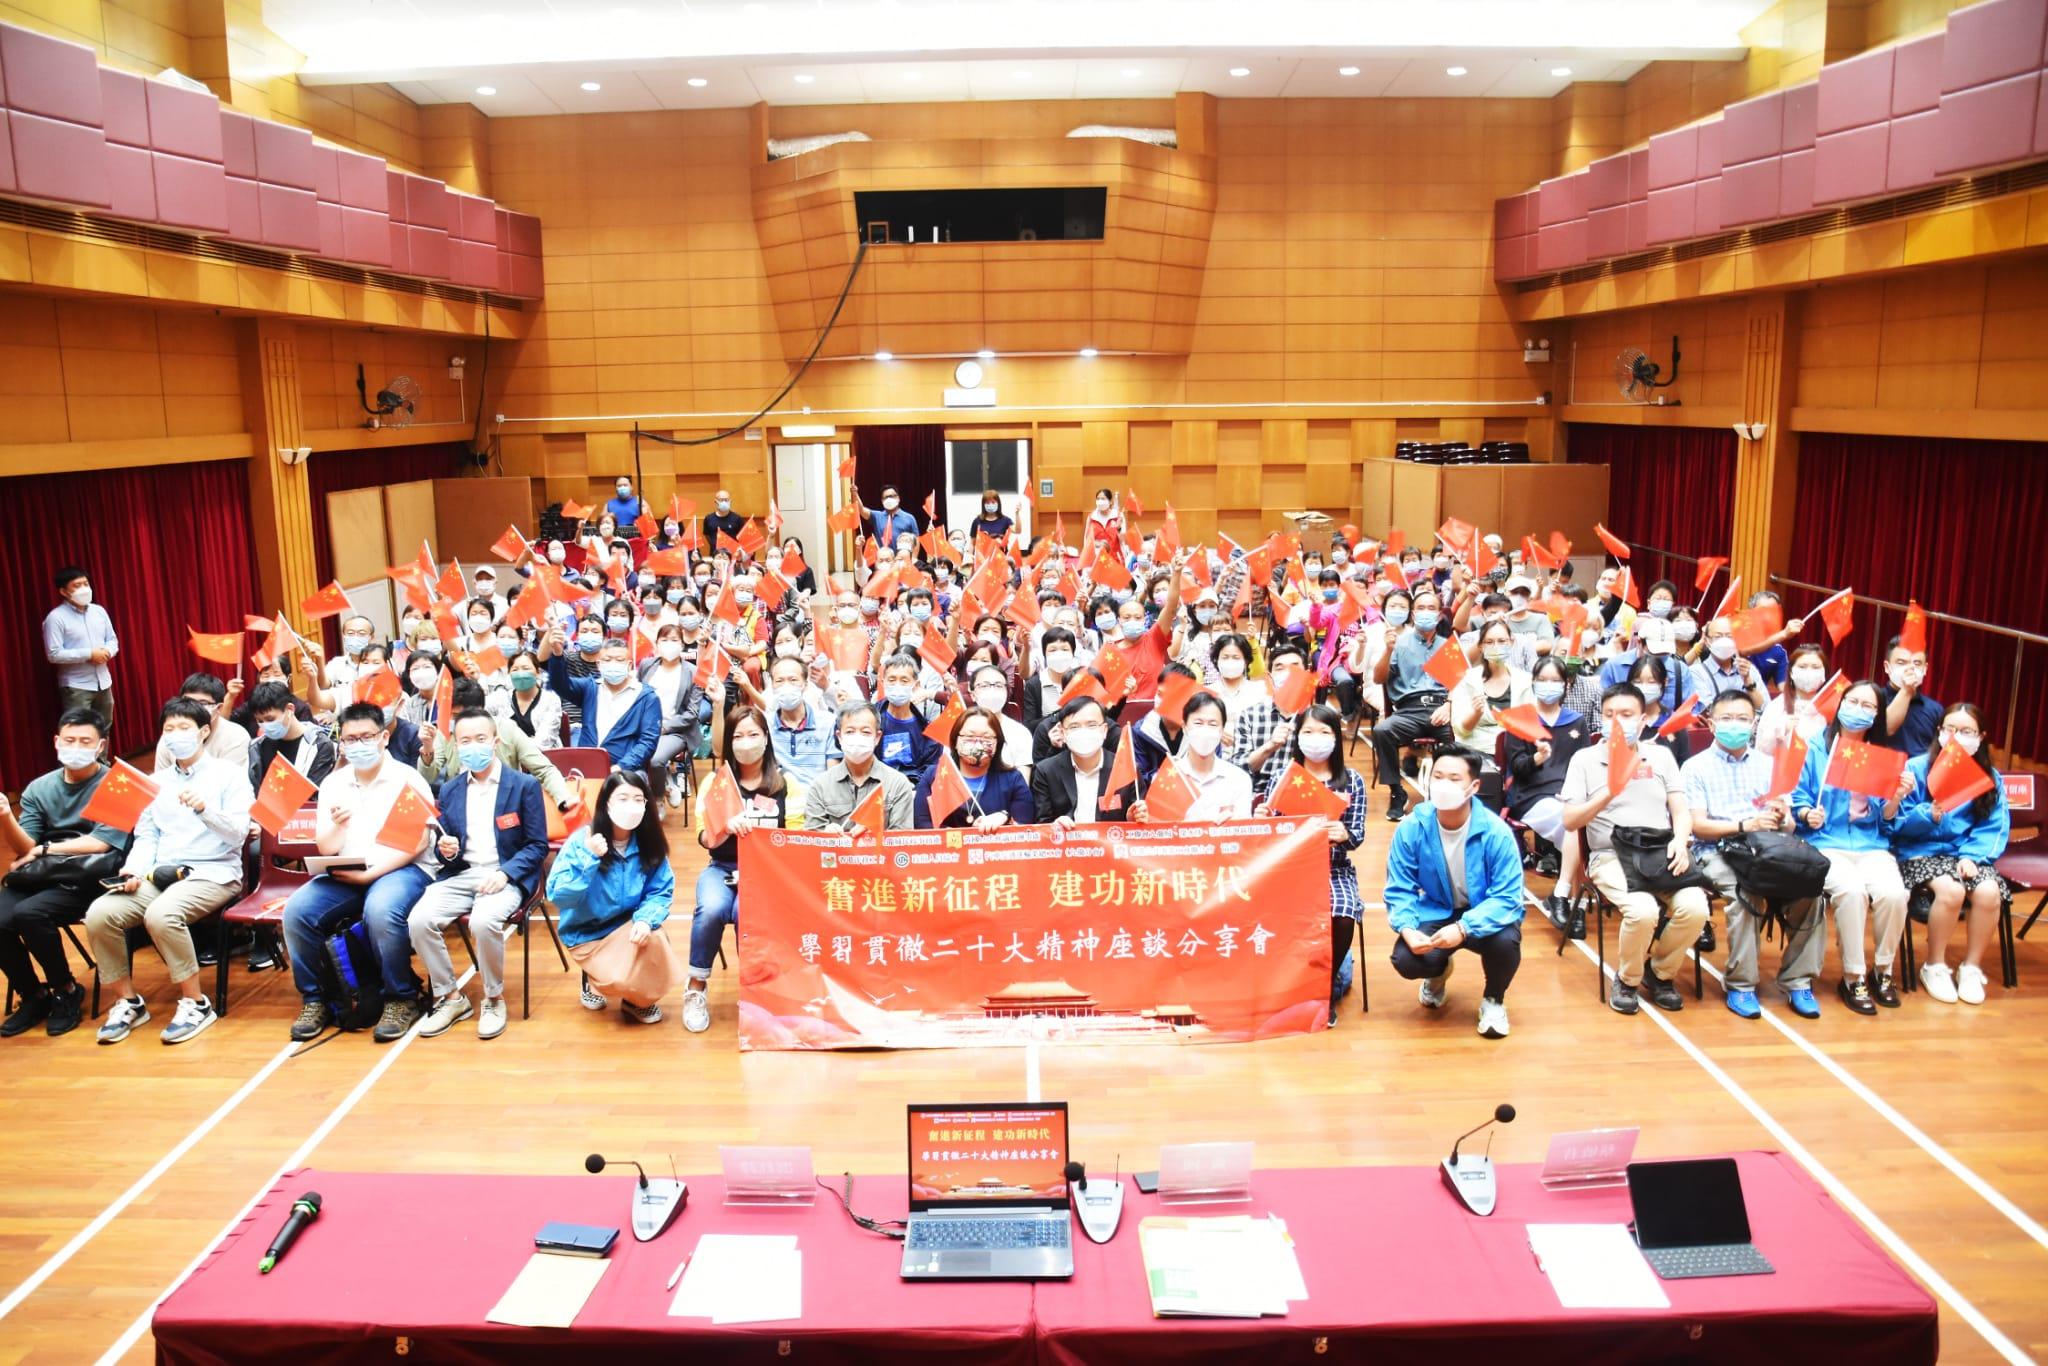 The Kowloon City District Office, together with the Hong Kong Federation of Trade Unions (FTU) Kowloon West Office, the Office of Legislative Council Member Mr Wong Kwok, FTU Kowloon City, Sham Shui Po and Yau Tsim Mong District Service Offices and the Ambitious and Energetic Youths Club held a session on "Spirit of the 20th National Congress of the Communist Party of China" at the FTU To Kwa Wan Workers' Club on November 15. Photo shows the guests and participants at the session.